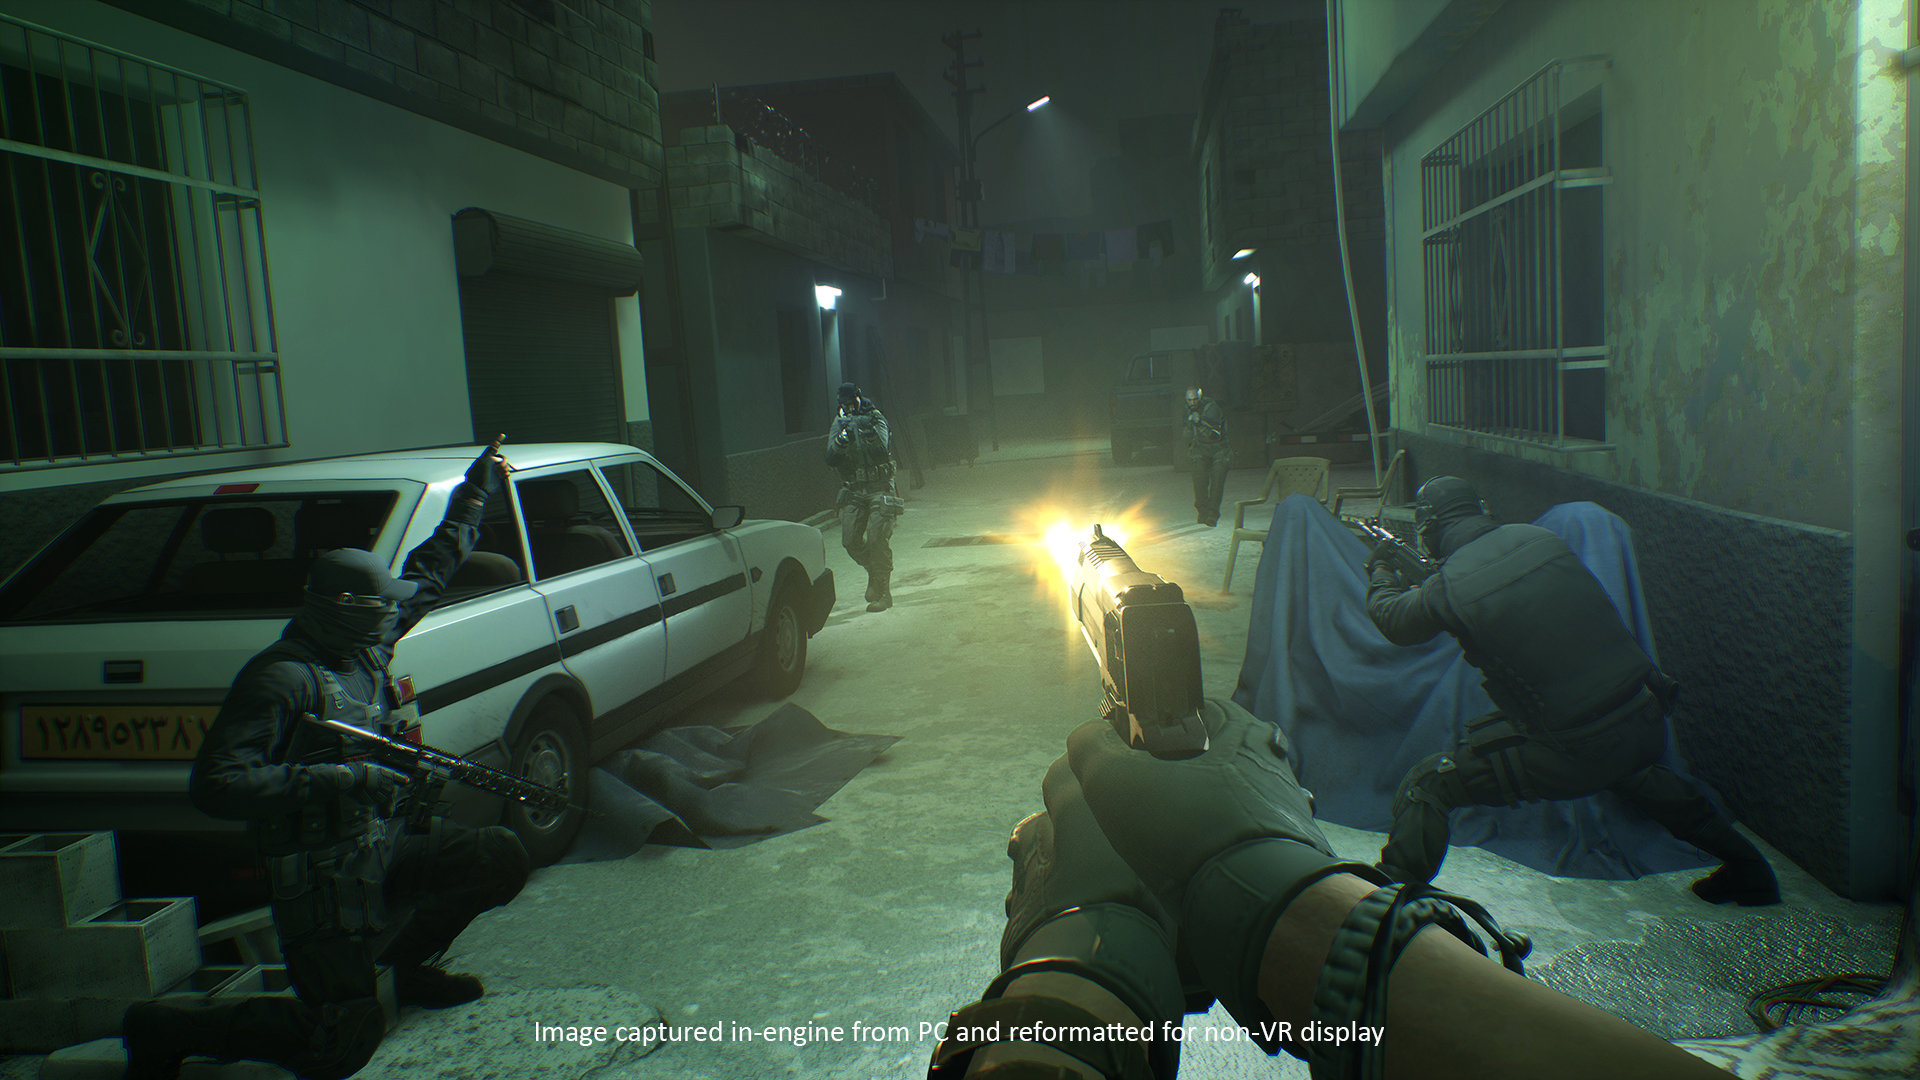 Firewall Zero Hour (PS4 / PlayStation 4) Game Profile | News, Reviews